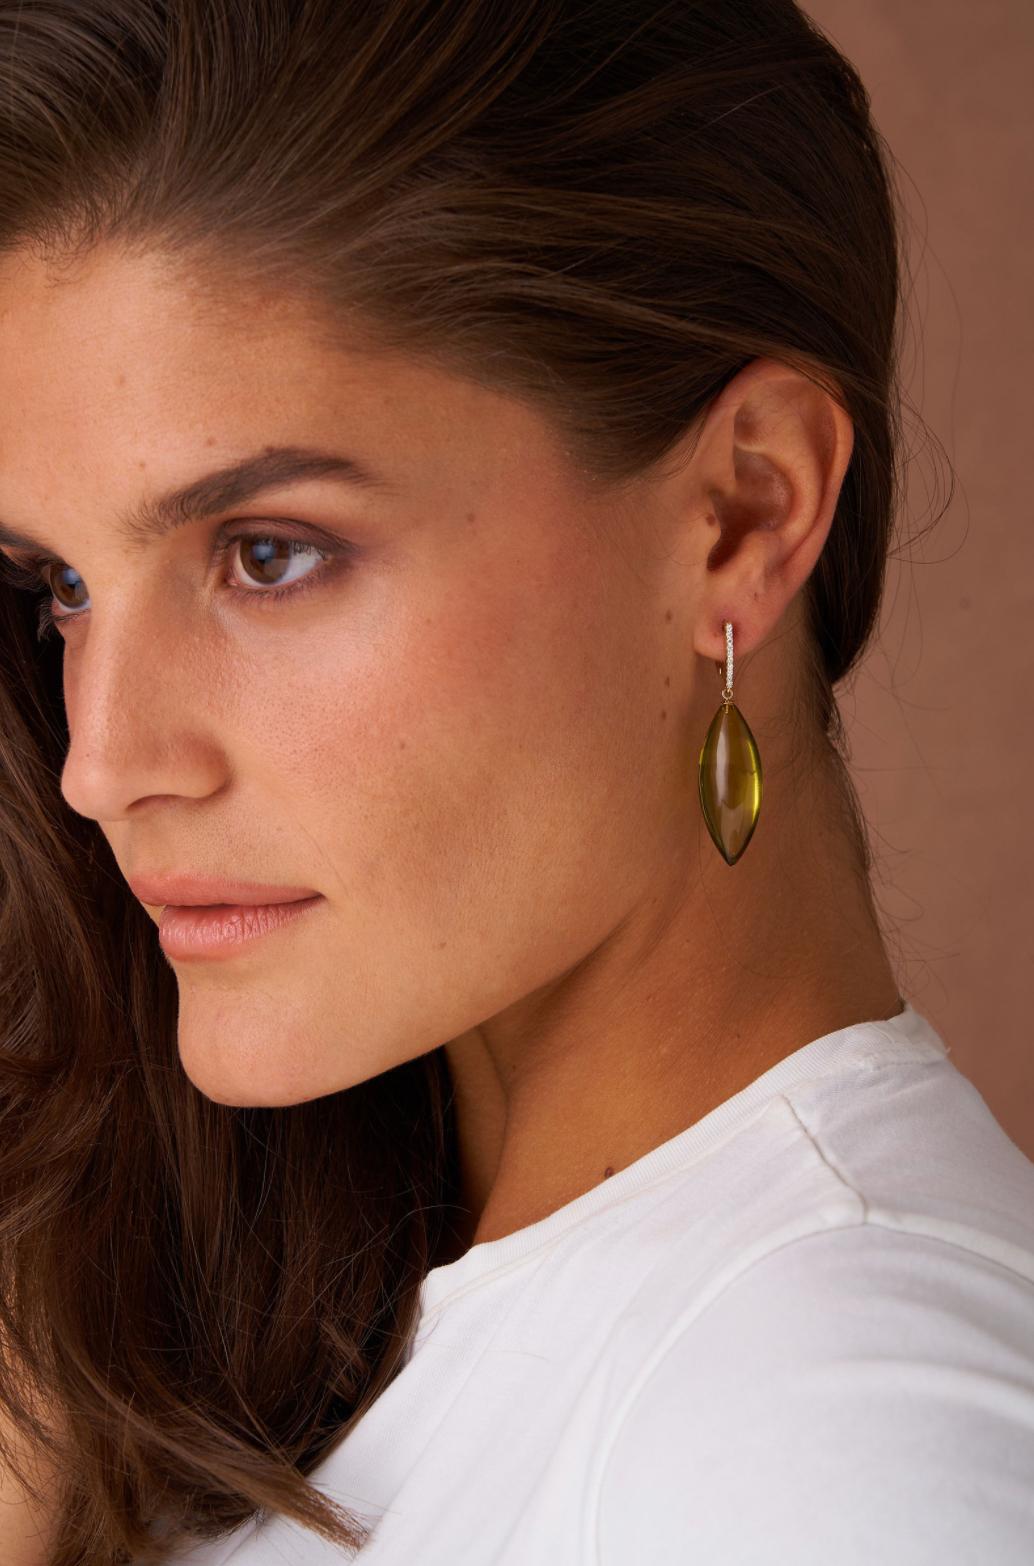 Introducing stunning green amber and diamond drop earrings, by Michael Kanners. Crafted in 14k gold, the organic design showcases vibrant amber stones suspended from dazzling diamonds. The delicate drop style catches the light beautifully, making